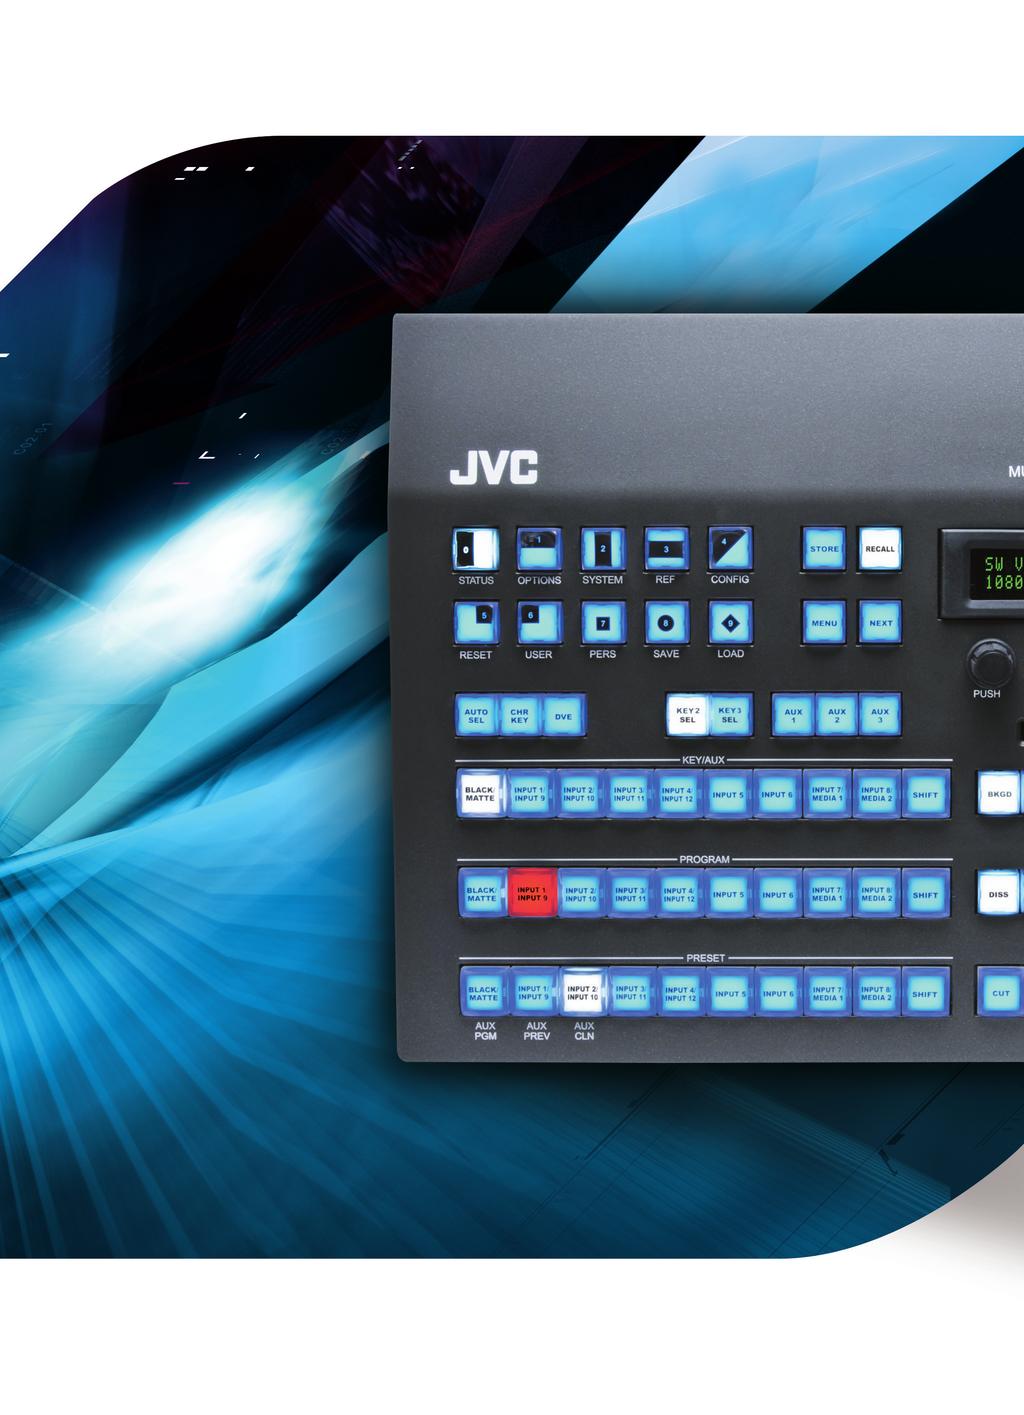 KM-H3000 Multi-format digital production switcher Wipes/menu Memory/menu Memory access keys for quickly recalling memory sets from one of the ten available memories Menu and Next keys activate and